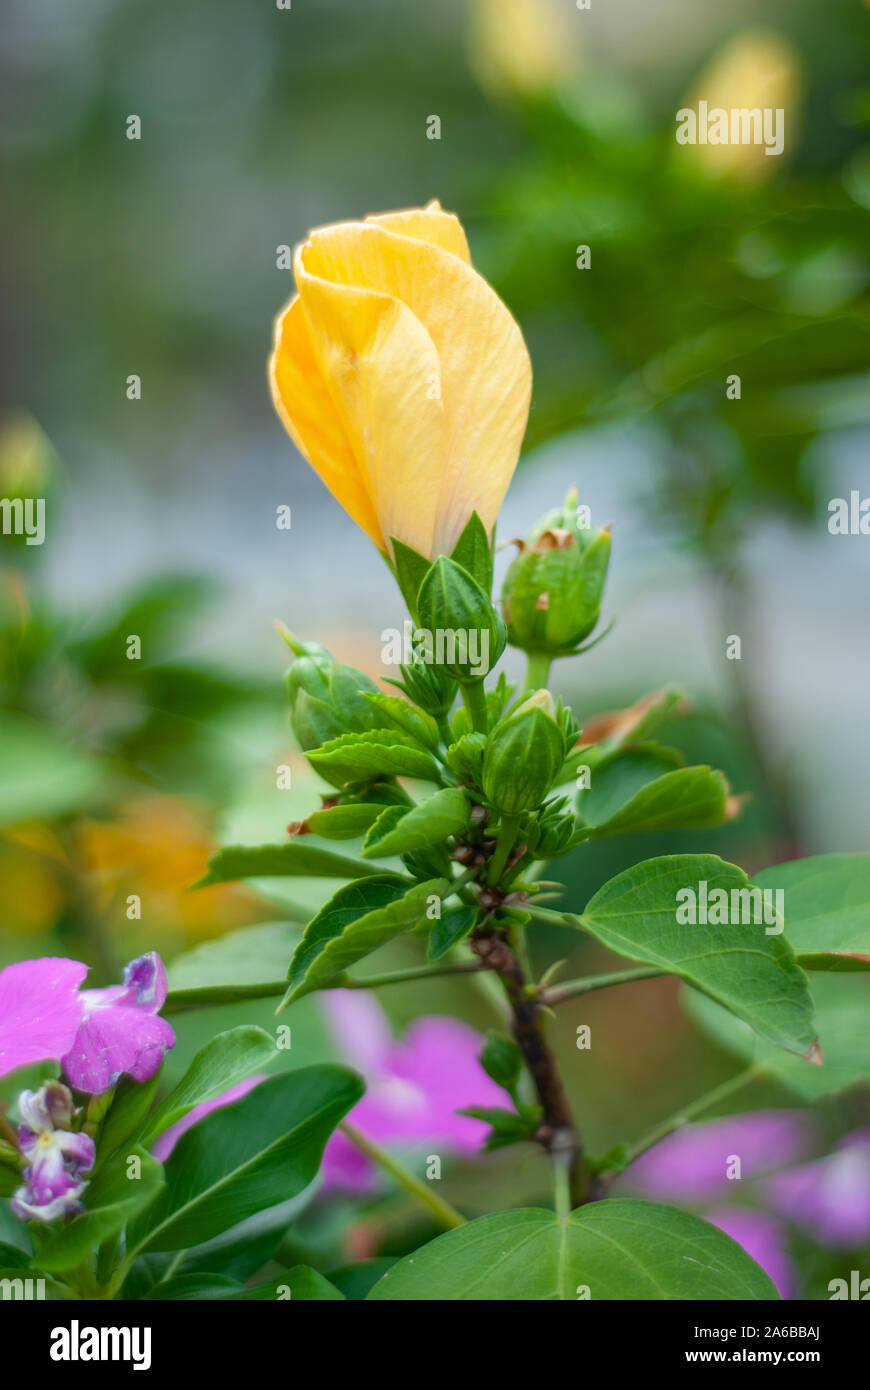 Yellow Potentilla flower, among the blurred background, not yet fully bloomed Stock Photo